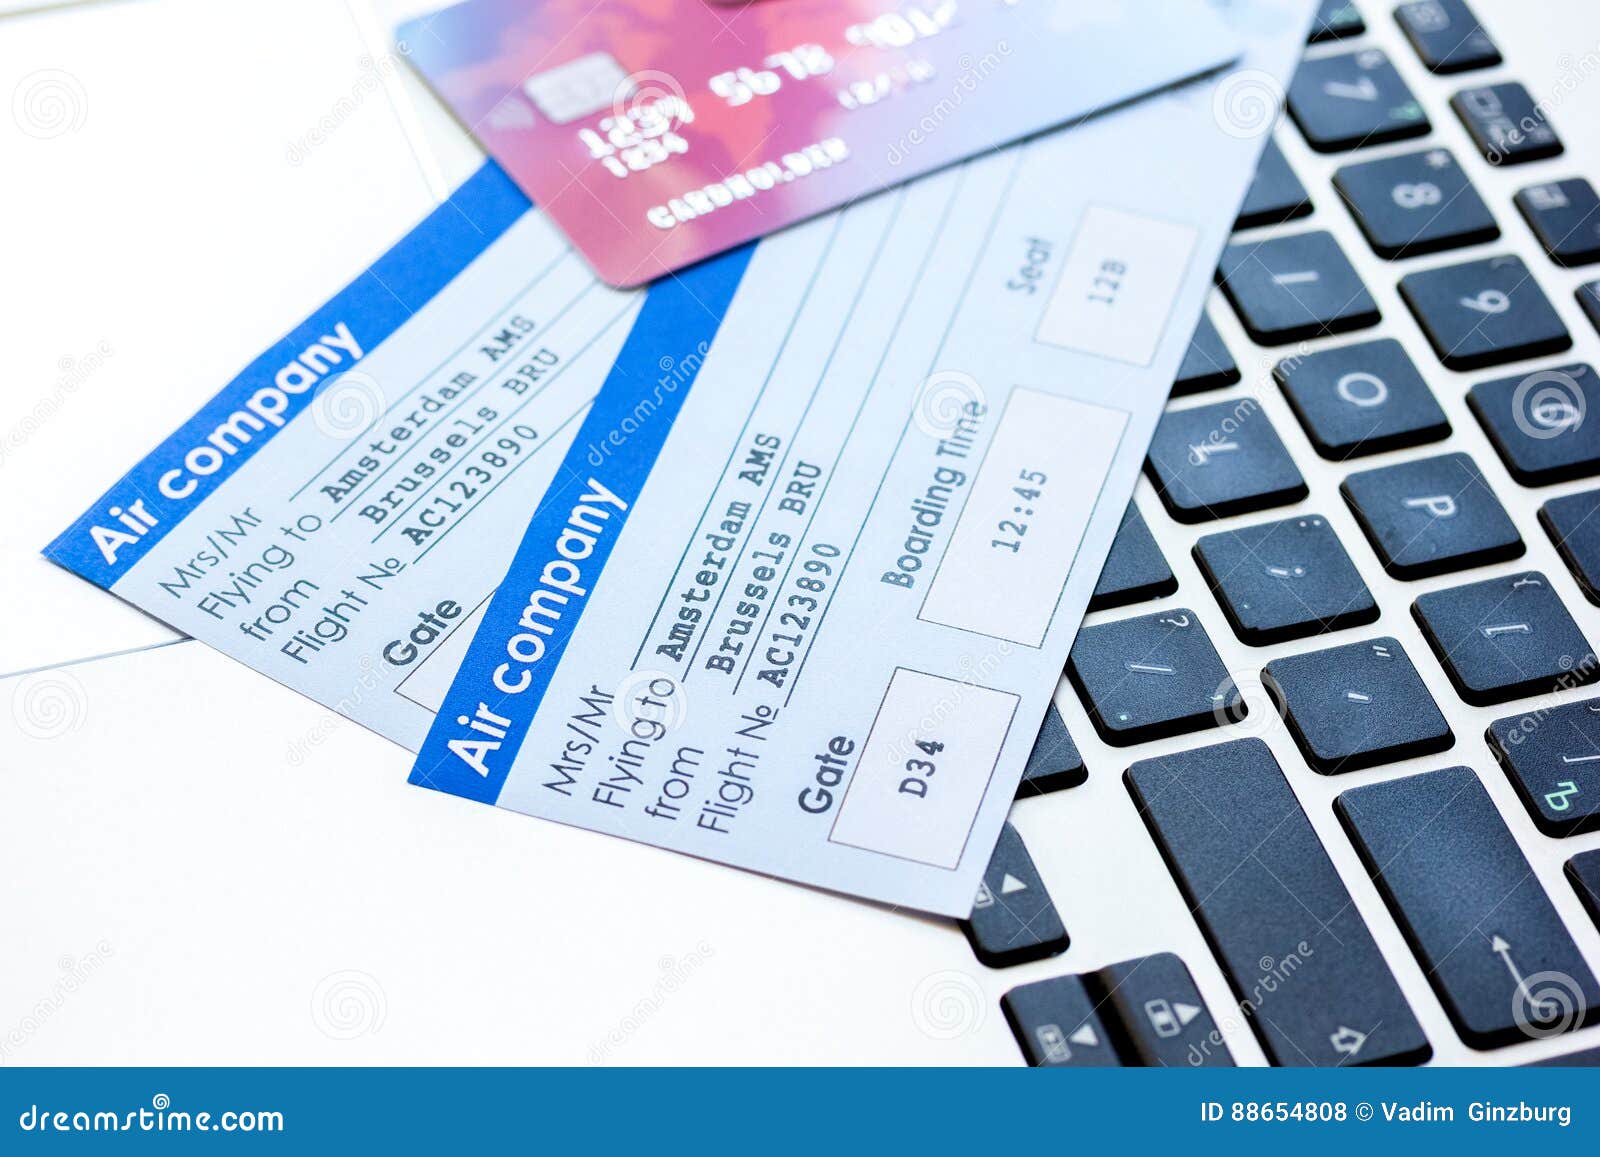 Buying Airline Tickets Online With Credit Cards On Keyboard Background Stock Photo - Image of ...